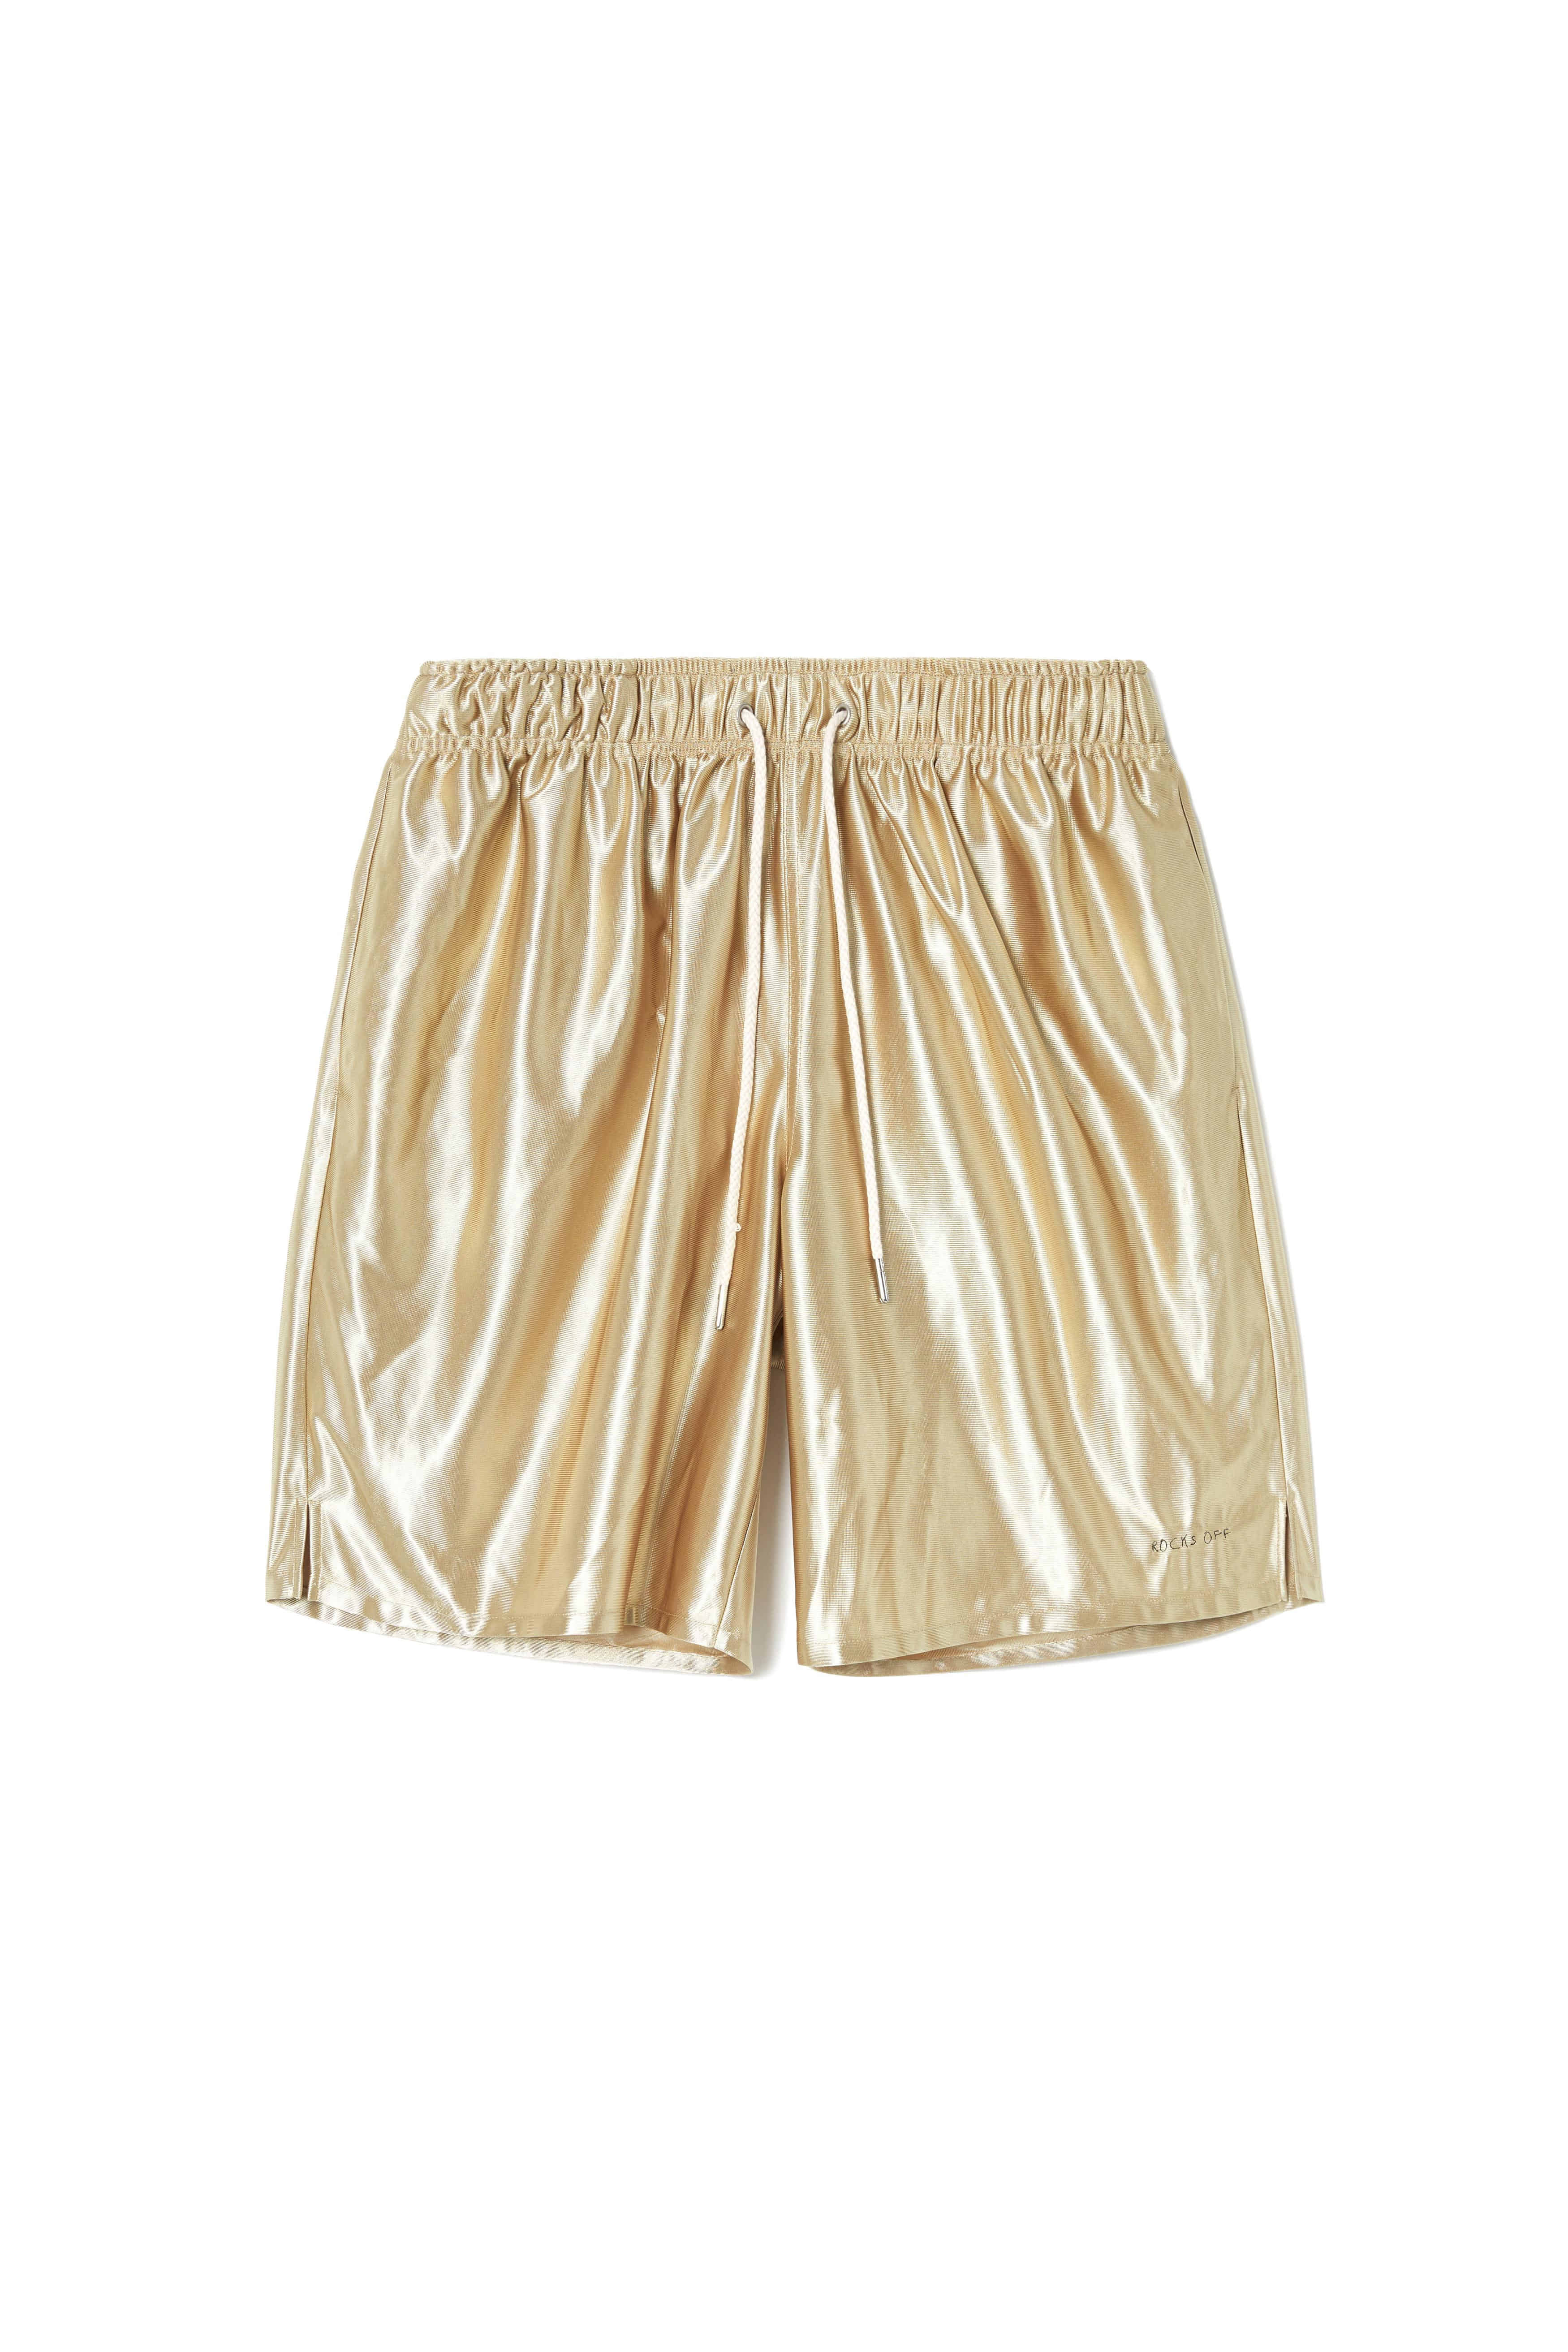 SHINING SHORTS IN CHAMPAGNE GOLD